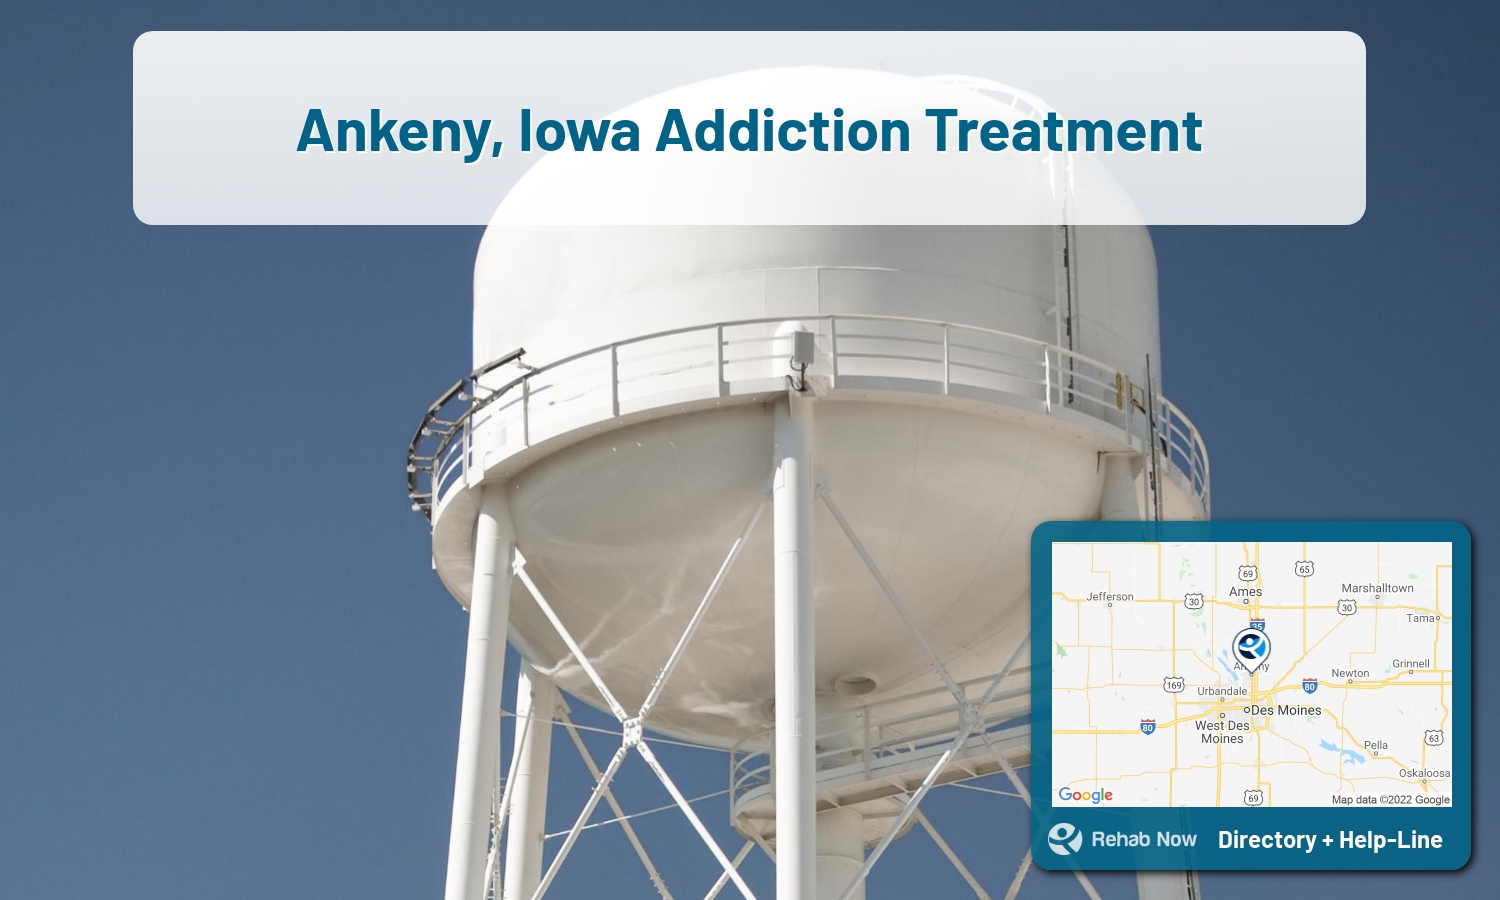 Ankeny, IA Treatment Centers. Find drug rehab in Ankeny, Iowa, or detox and treatment programs. Get the right help now!